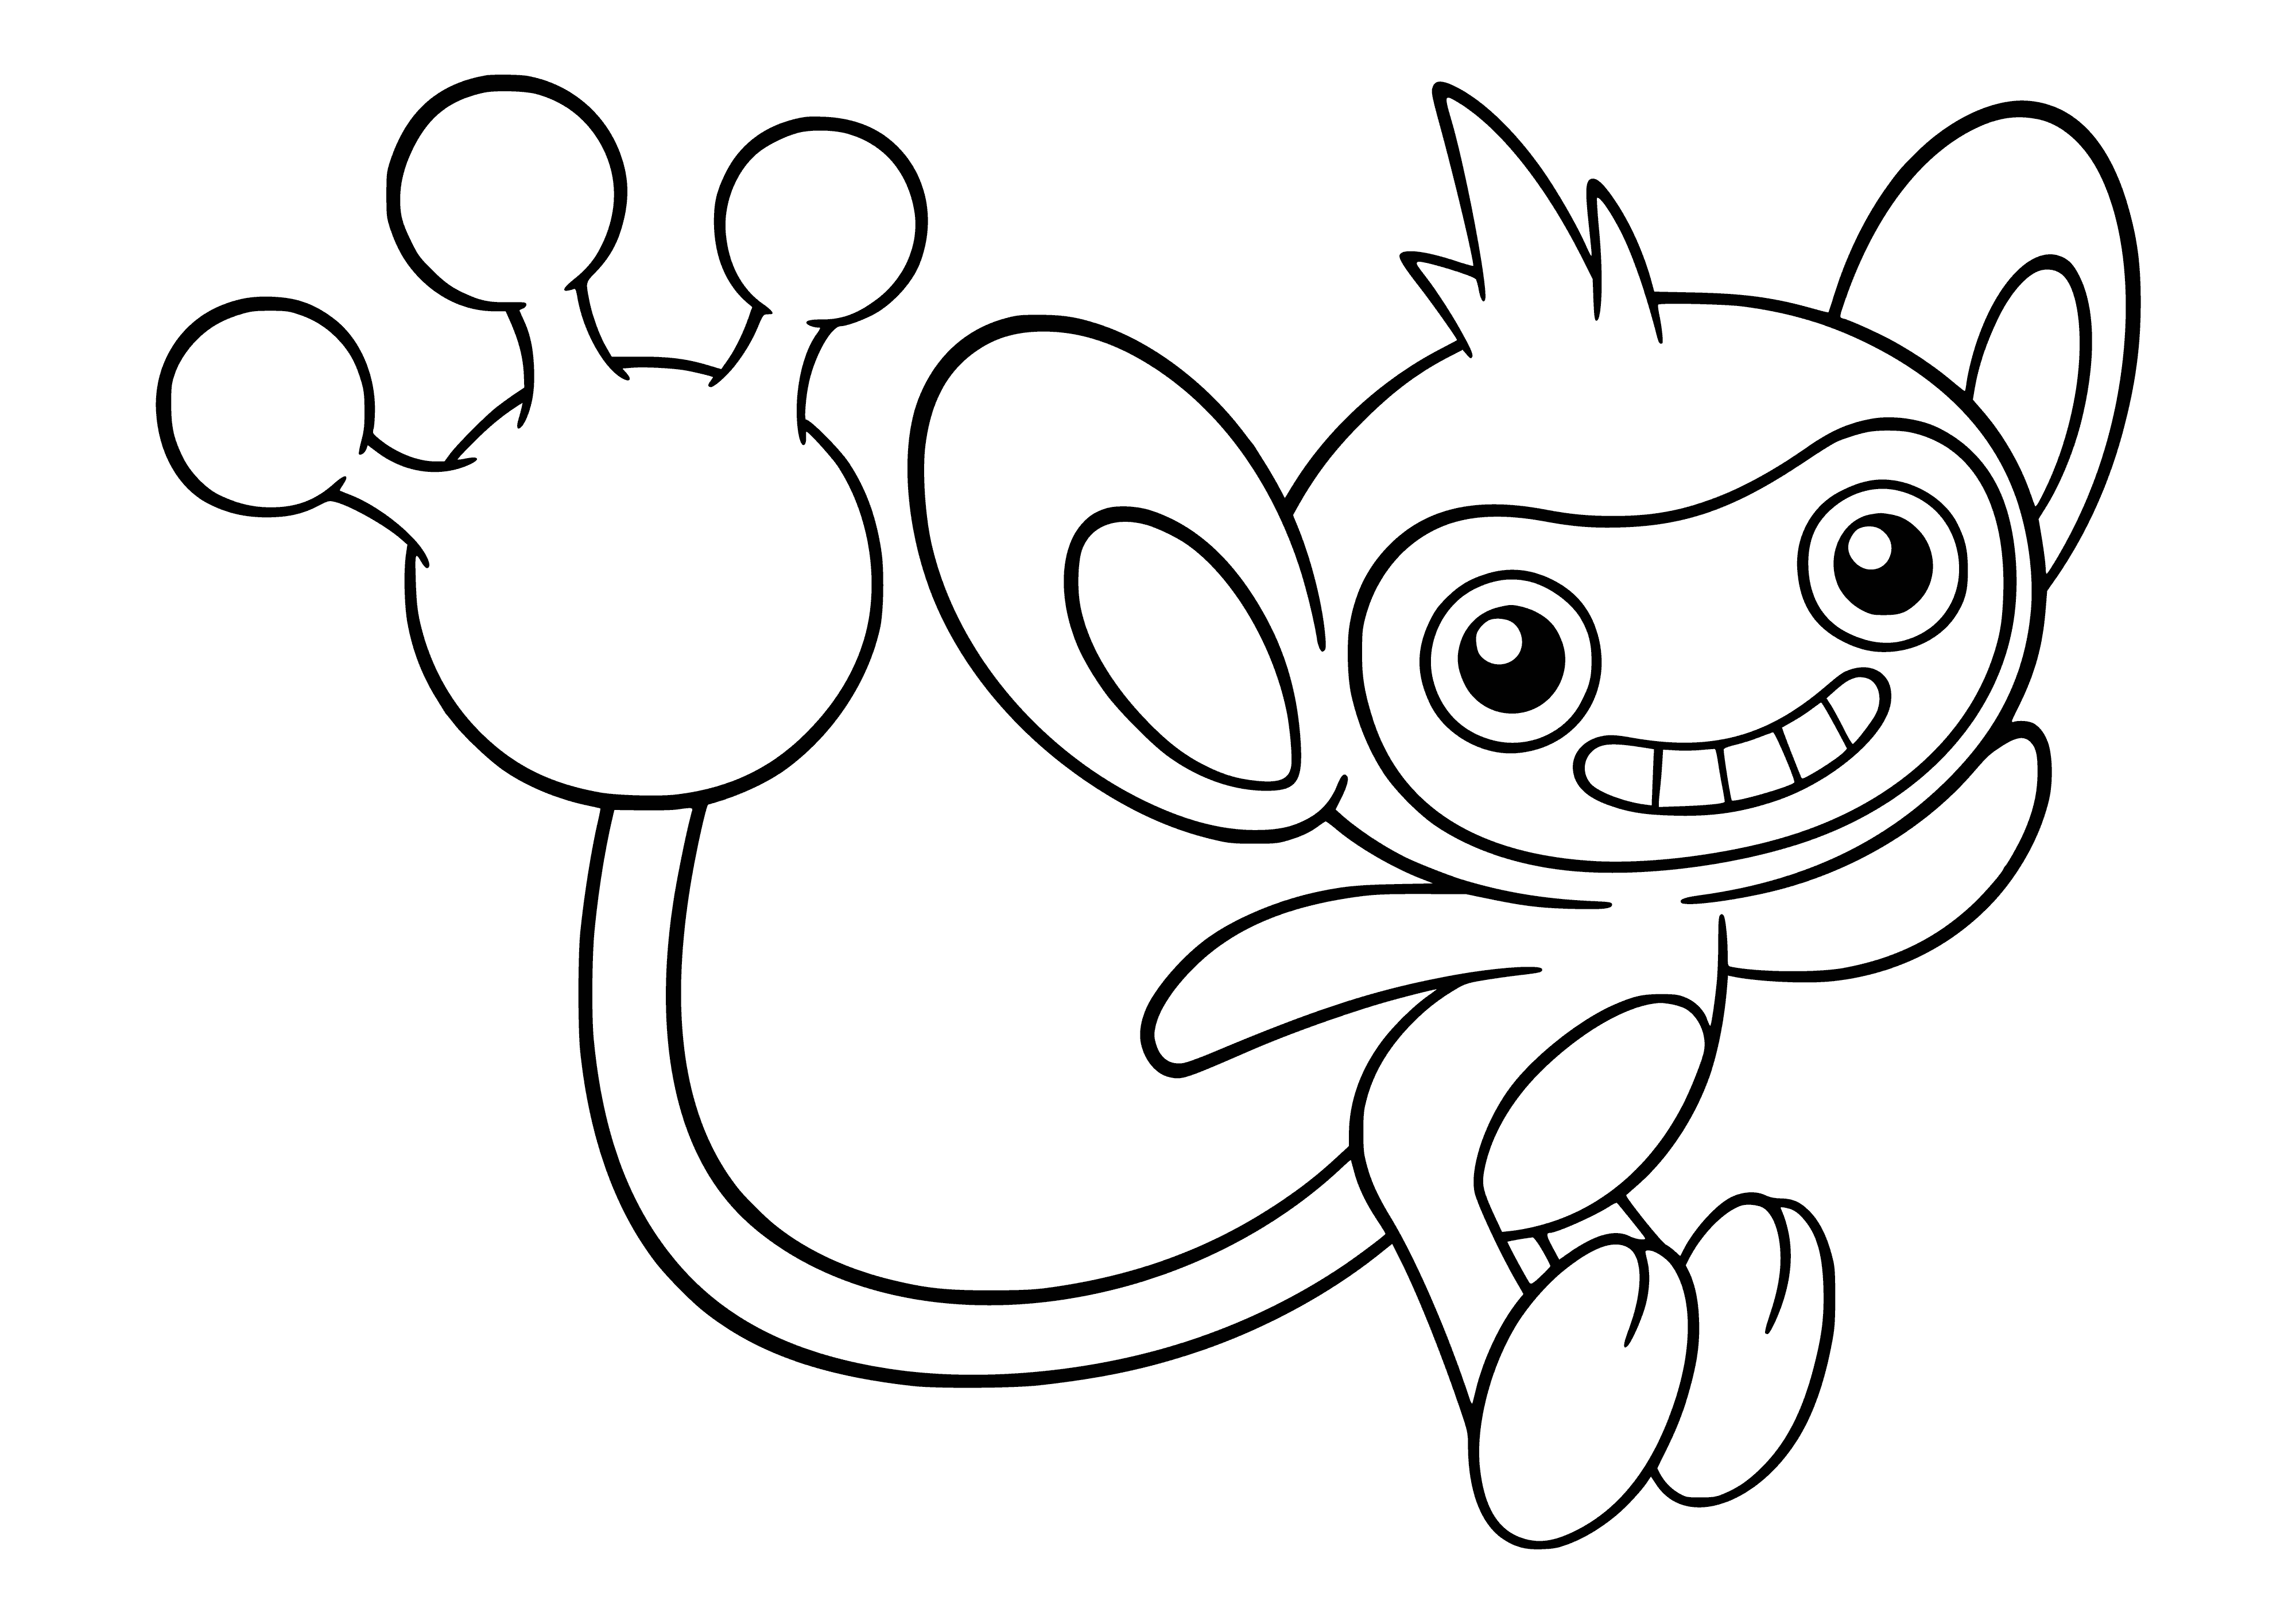 coloring page: Aipom is a brown, monkey-like Pokémon w/ a round body, thin curled tail, big ears, & 3-fingered paws. Has red stripes on its back.